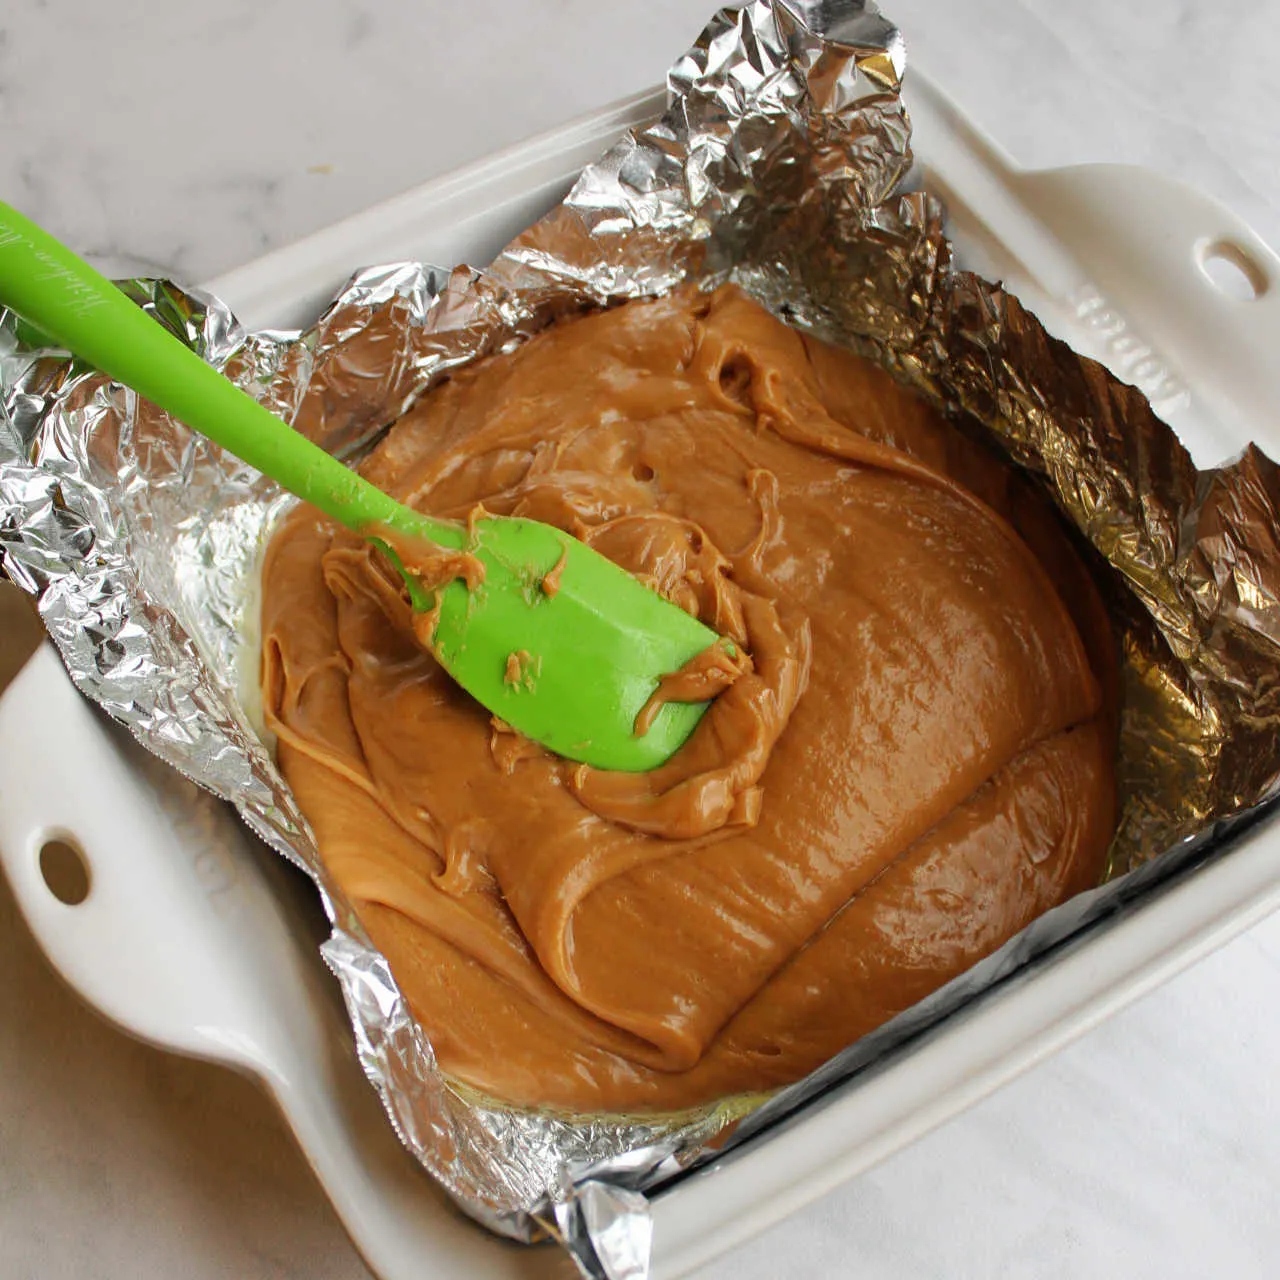 Spreading peanut butter fudge mixture into foil lined pan.